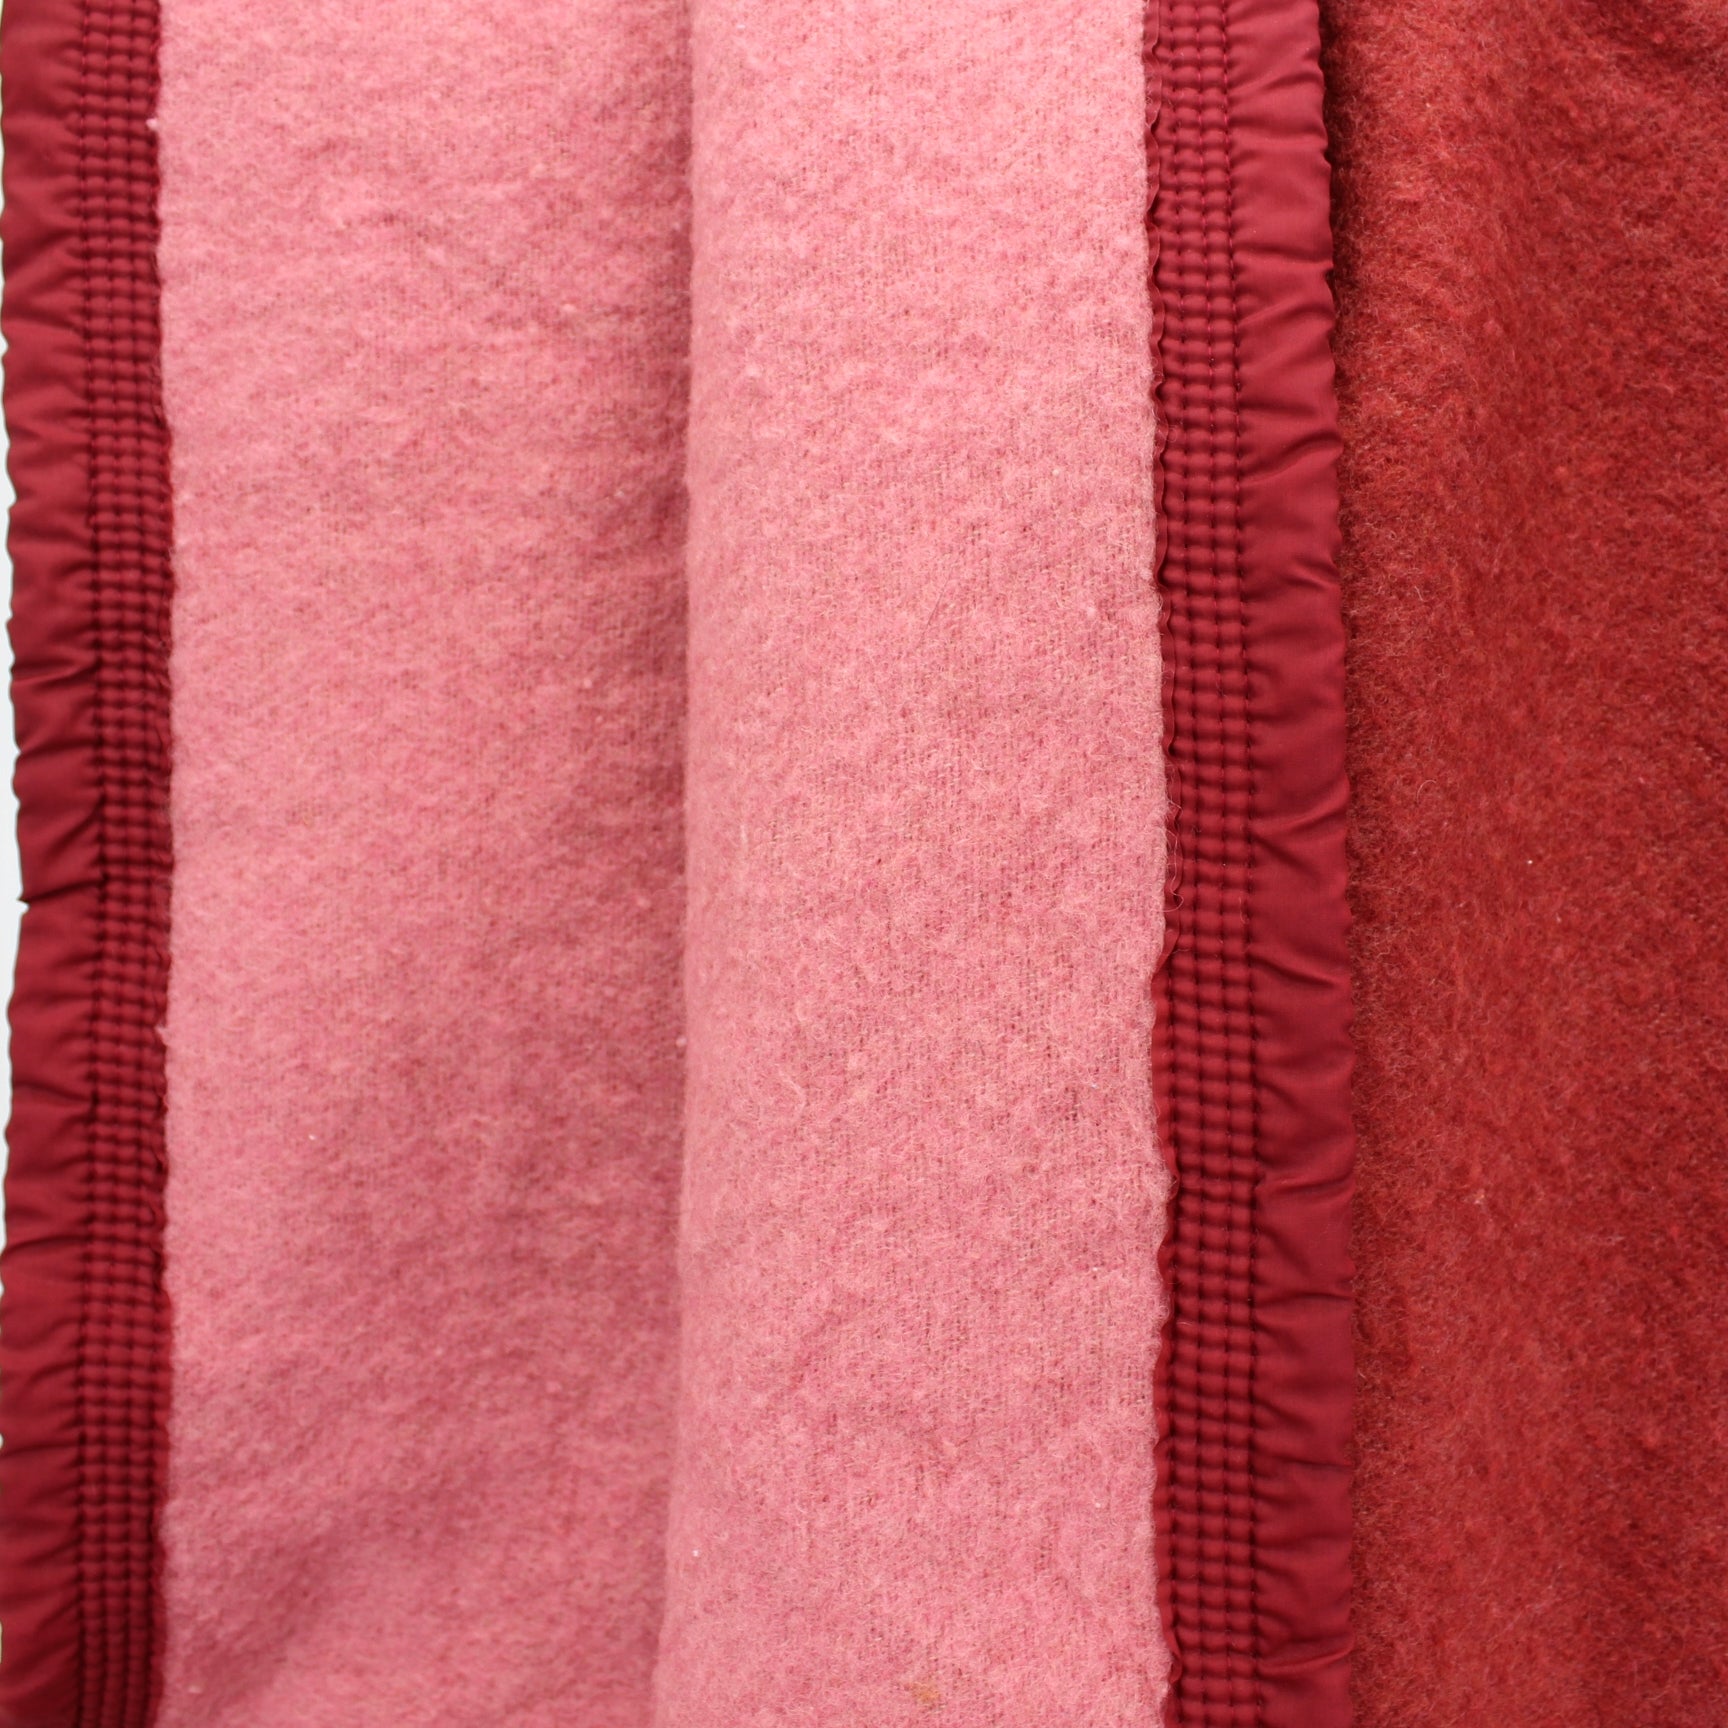 Belier Laine Wool Blanket France Deep Red Reverse Rose Heavy Weight  93" X 86" very heavy substantial weight blanket